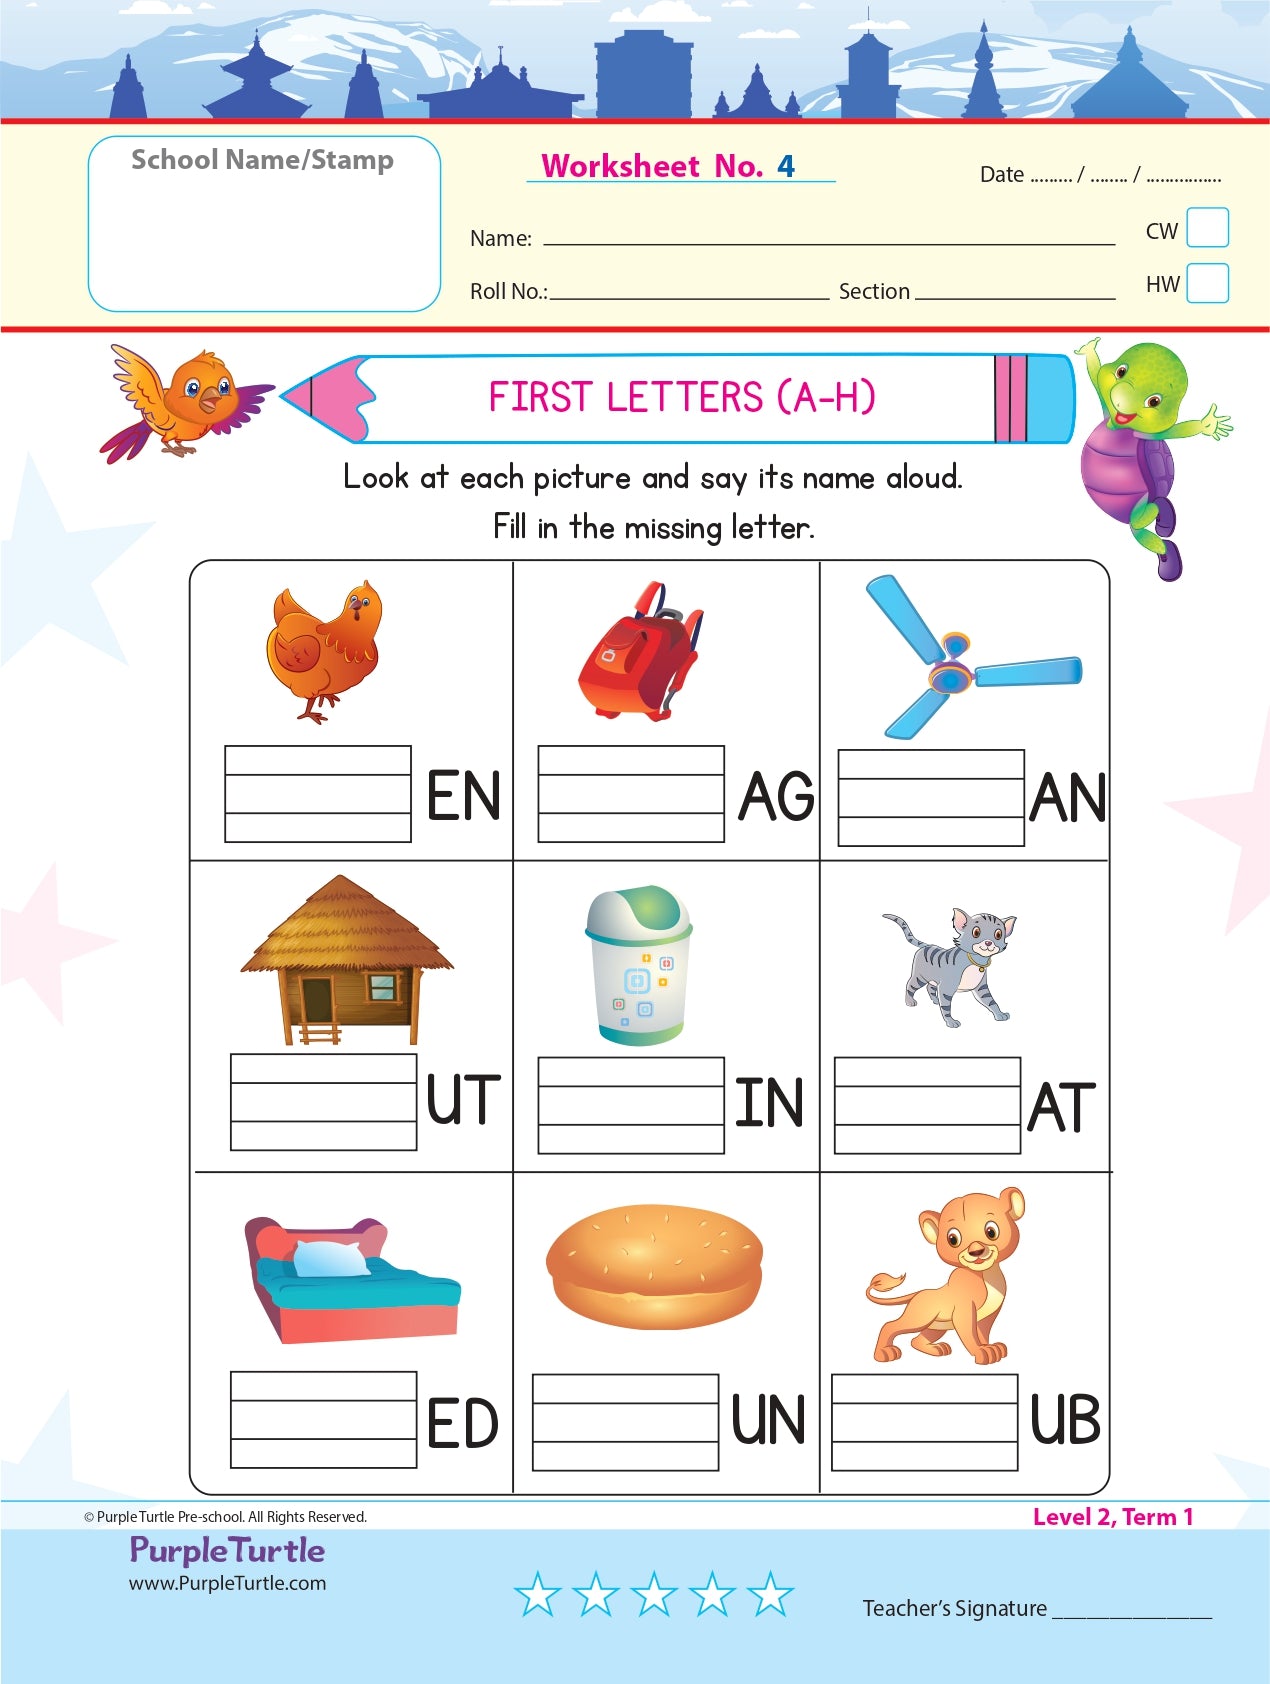 purple turtle worksheets combo for lkg english maths evs 100 worksheets 100 pages 50 leafs purpleturtle store